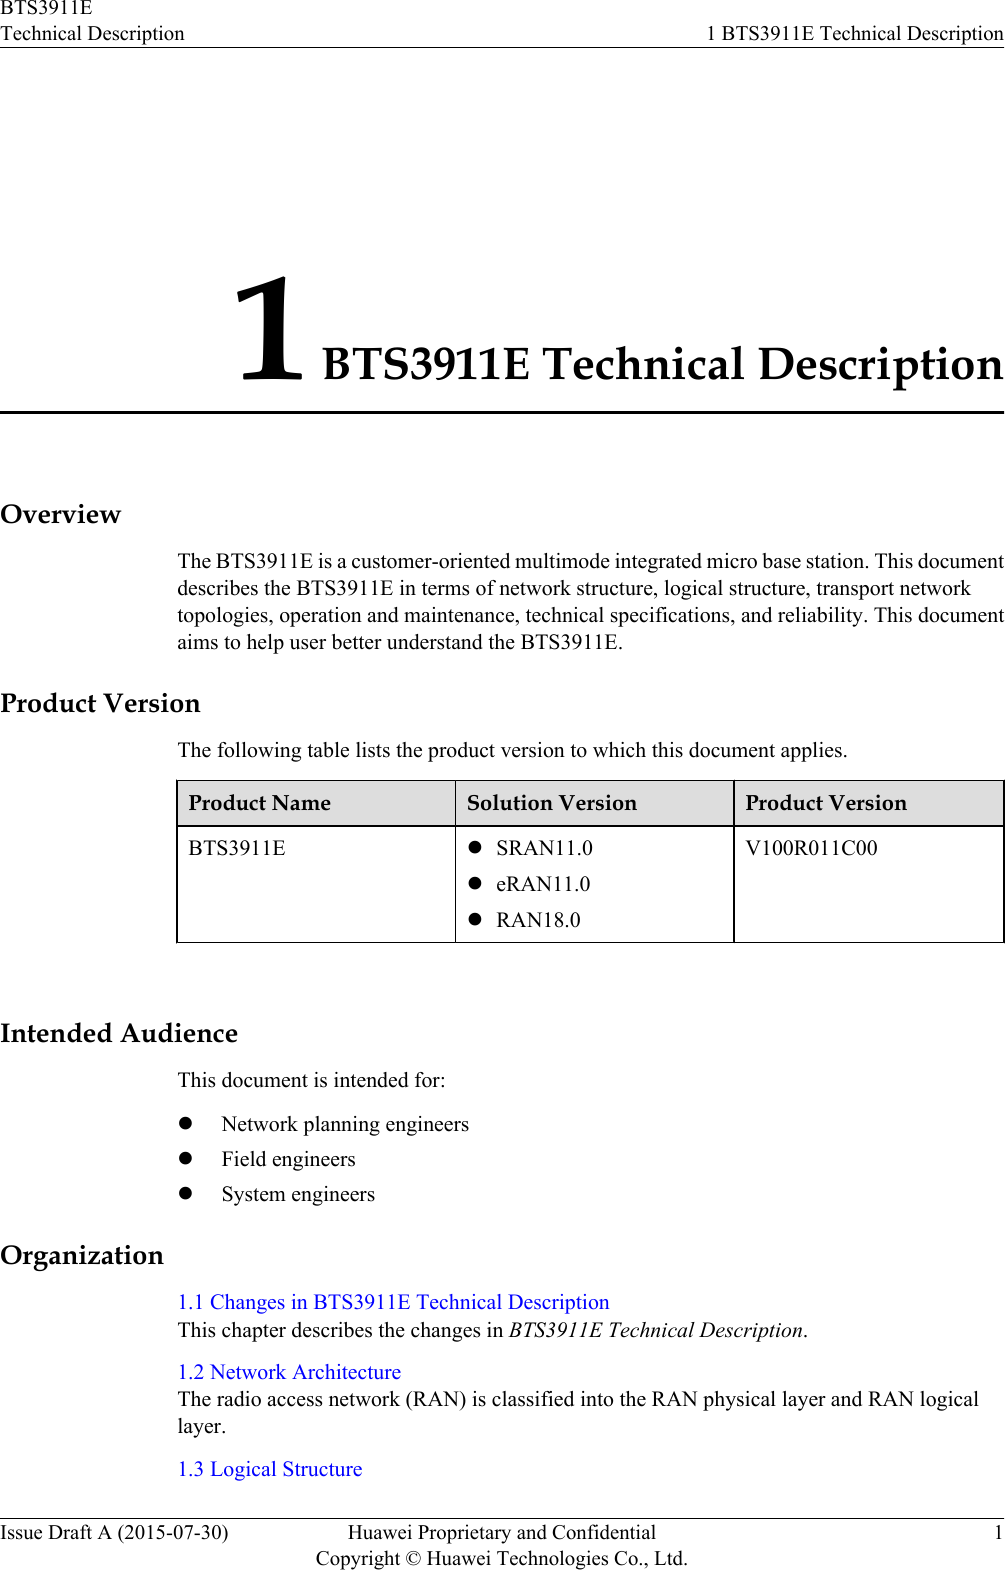 1 BTS3911E Technical DescriptionOverviewThe BTS3911E is a customer-oriented multimode integrated micro base station. This documentdescribes the BTS3911E in terms of network structure, logical structure, transport networktopologies, operation and maintenance, technical specifications, and reliability. This documentaims to help user better understand the BTS3911E.Product VersionThe following table lists the product version to which this document applies.Product Name Solution Version Product VersionBTS3911E lSRAN11.0leRAN11.0lRAN18.0V100R011C00 Intended AudienceThis document is intended for:lNetwork planning engineerslField engineerslSystem engineersOrganization1.1 Changes in BTS3911E Technical DescriptionThis chapter describes the changes in BTS3911E Technical Description.1.2 Network ArchitectureThe radio access network (RAN) is classified into the RAN physical layer and RAN logicallayer.1.3 Logical StructureBTS3911ETechnical Description 1 BTS3911E Technical DescriptionIssue Draft A (2015-07-30) Huawei Proprietary and ConfidentialCopyright © Huawei Technologies Co., Ltd.1